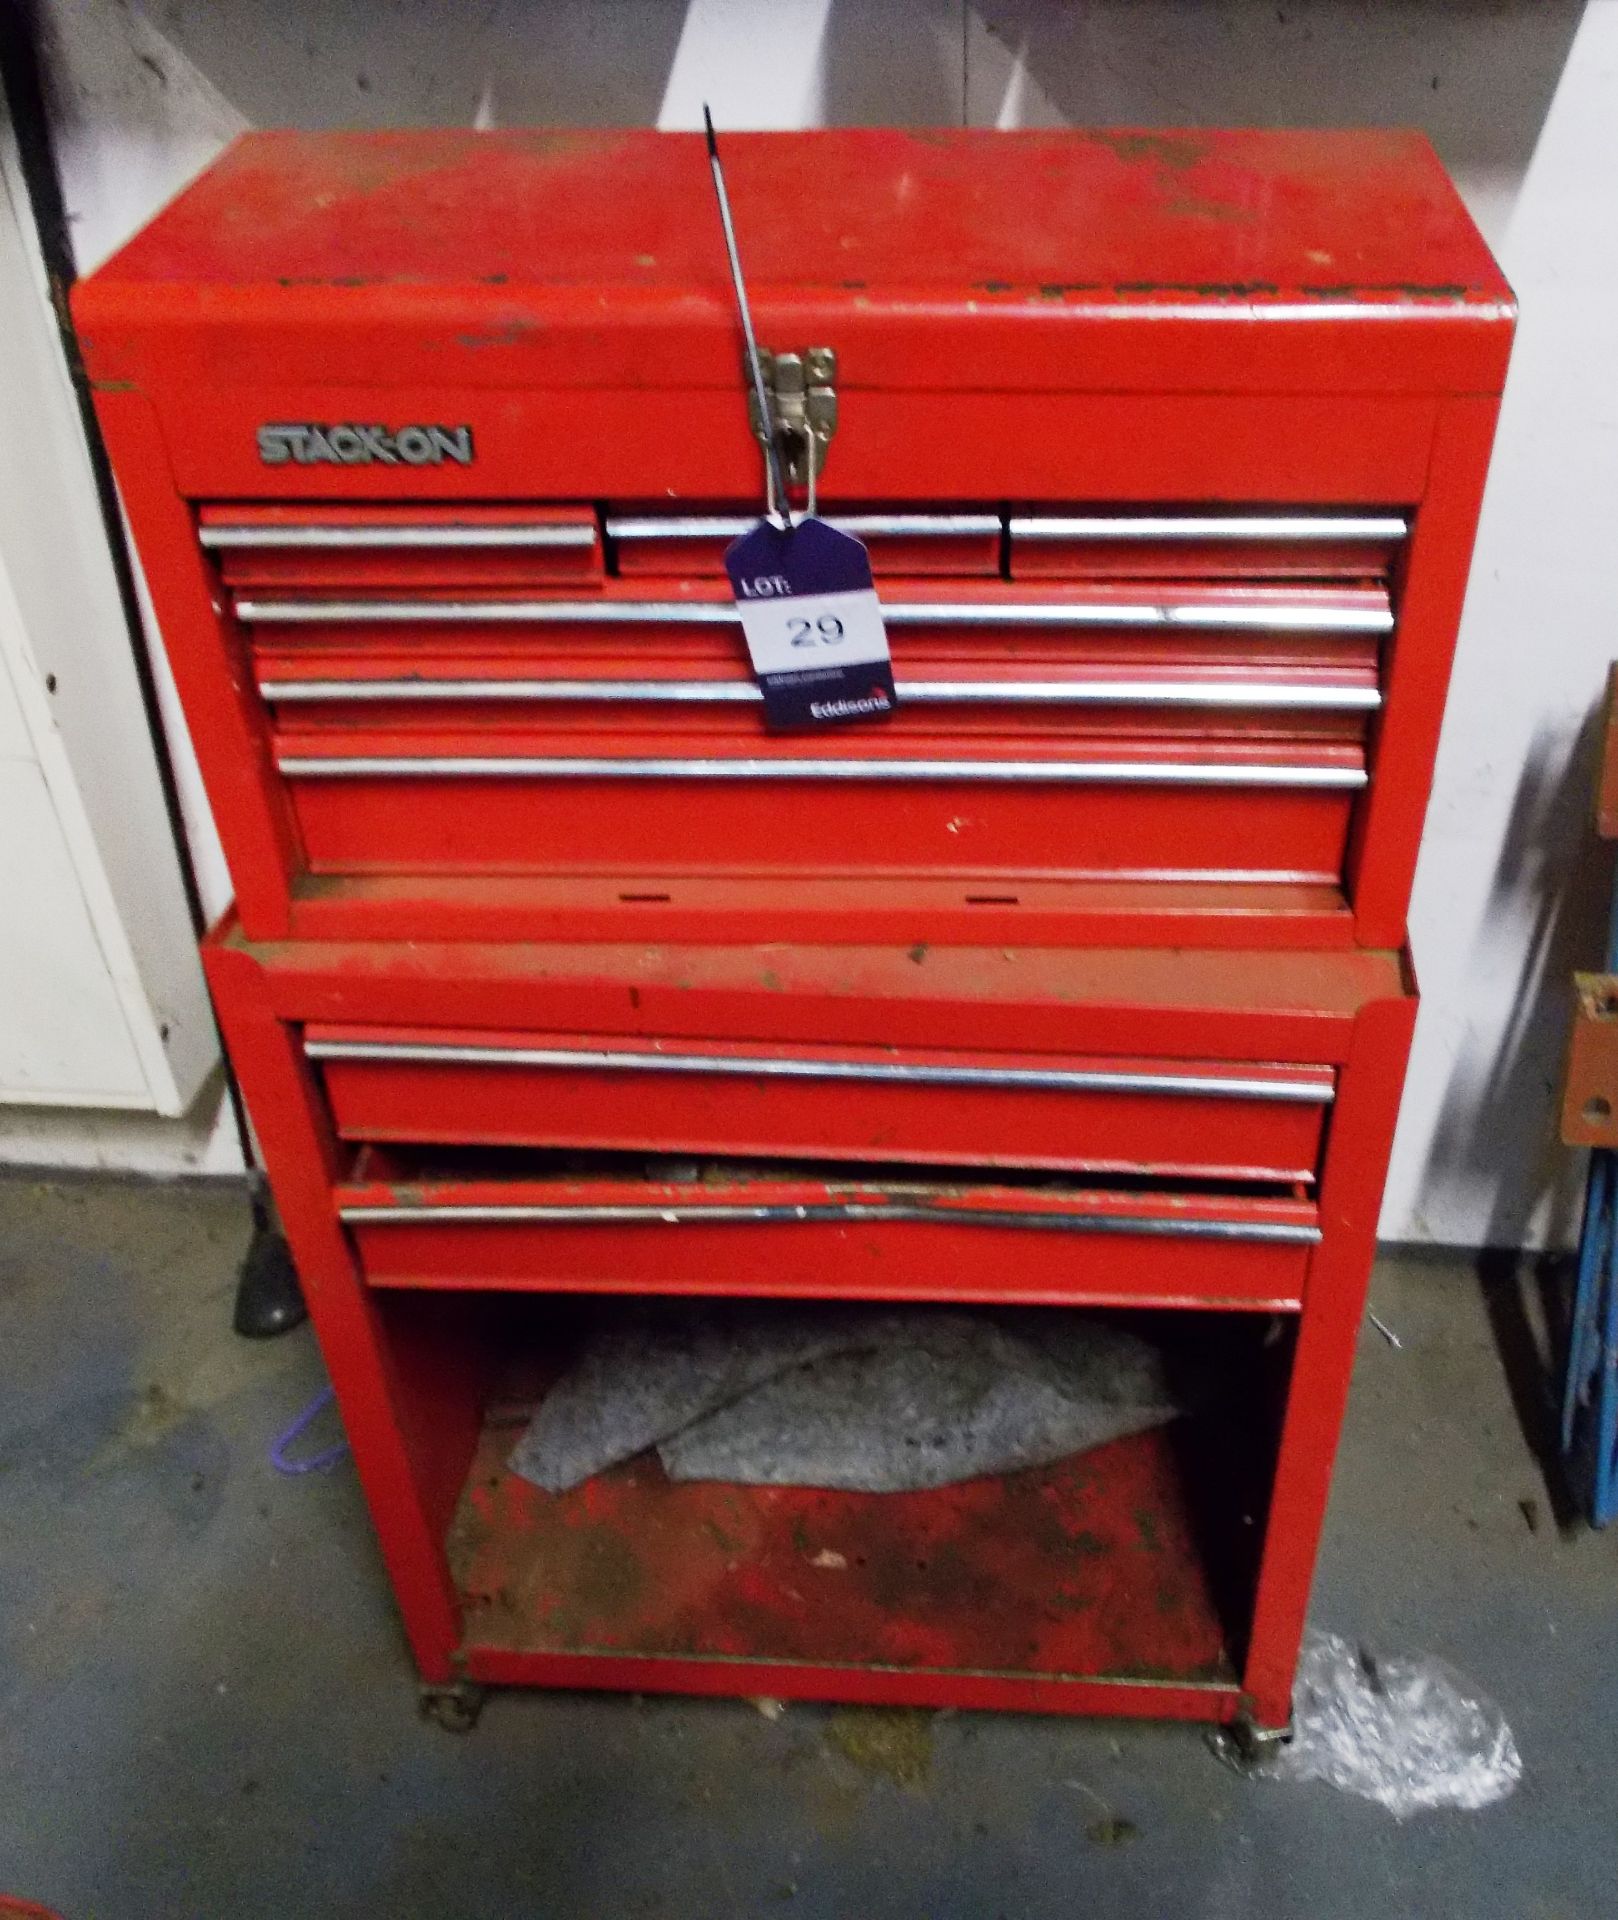 Stack-On Tool Chest and contents